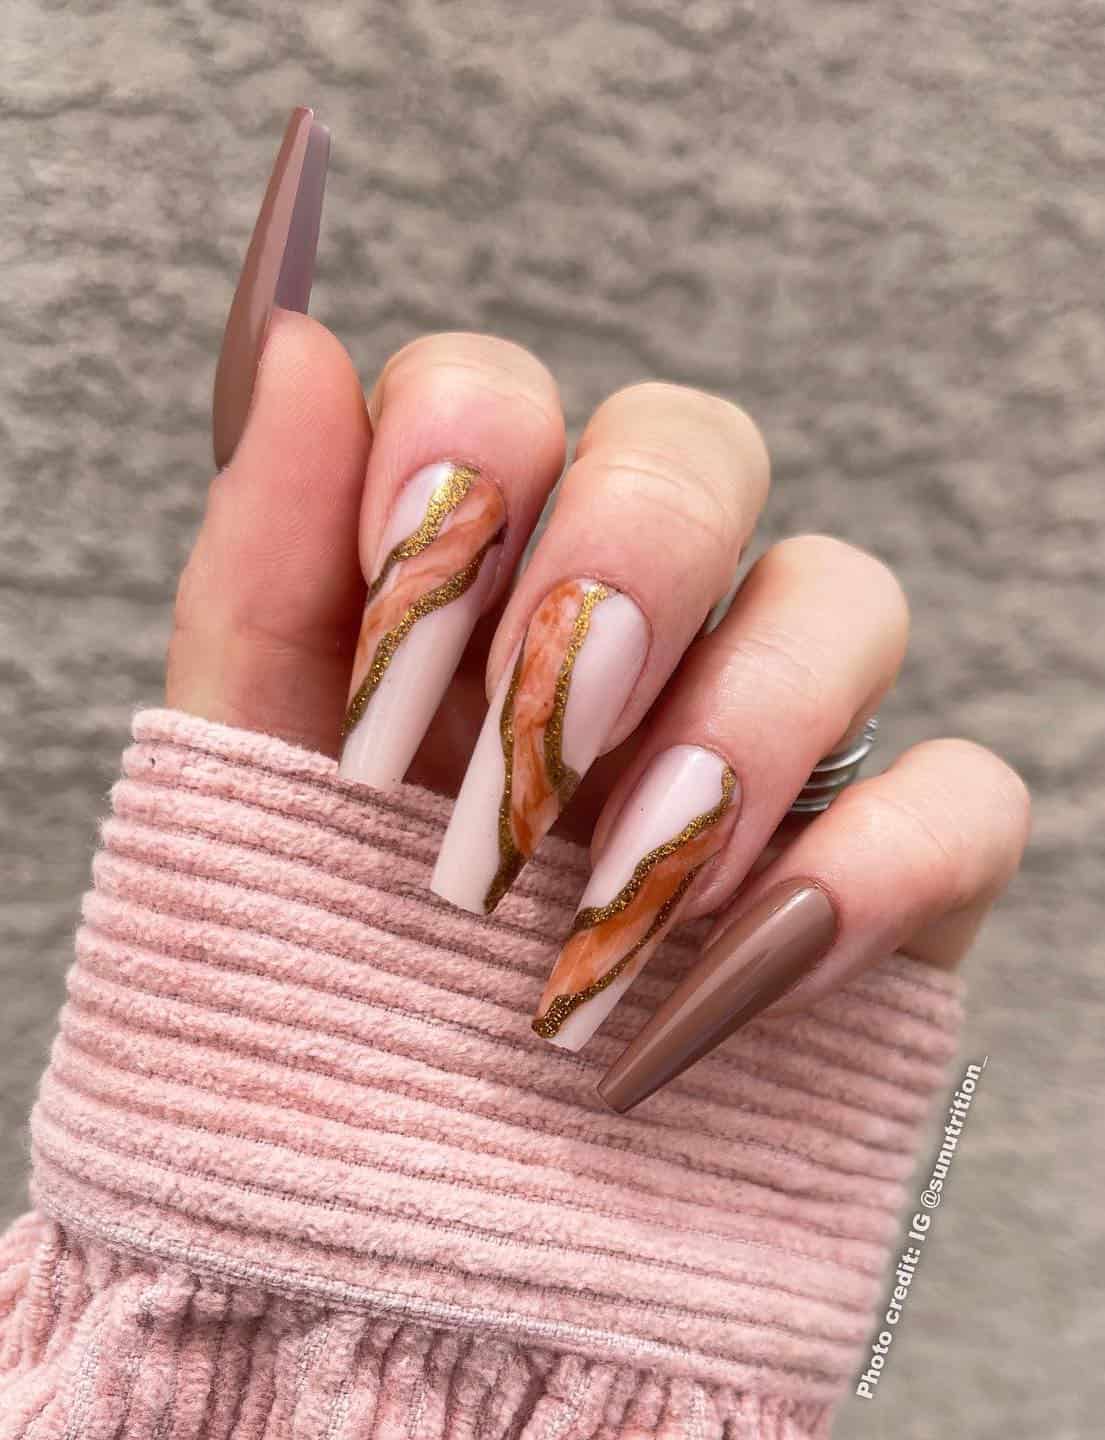 A hand with long coffin nails with two brown nails and three nude pink nails with marbled brown art and gold borders